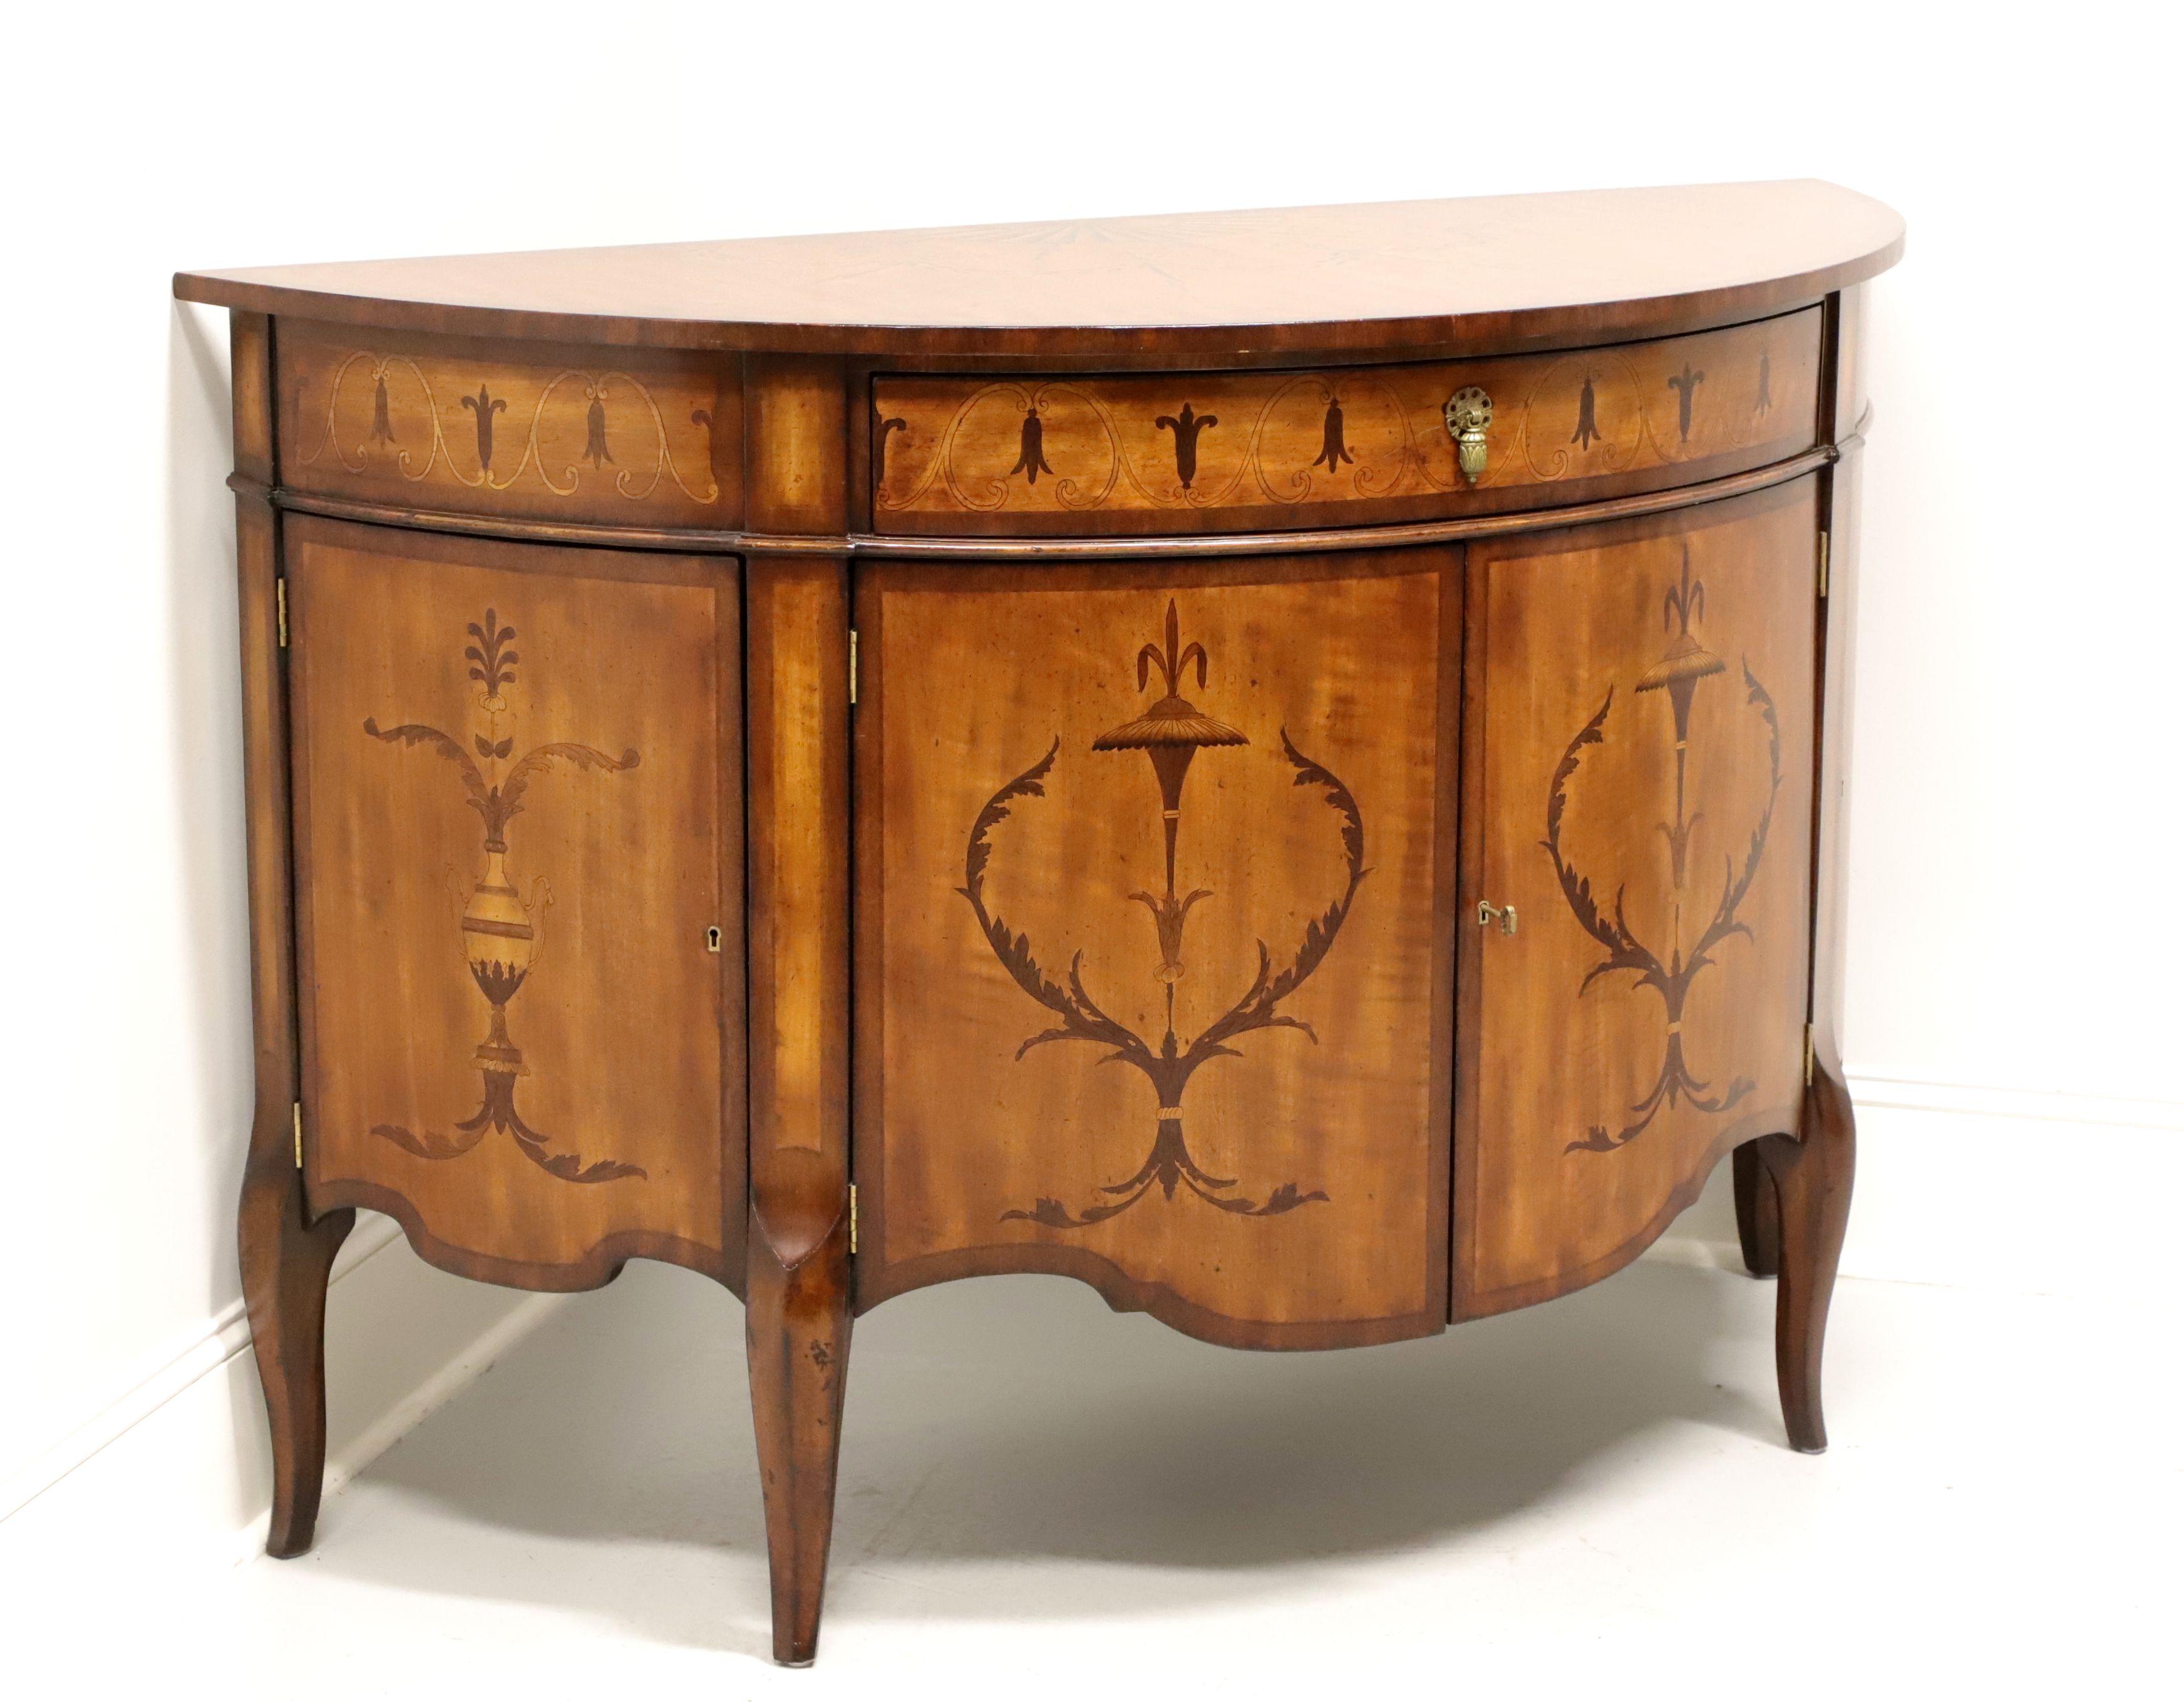 A George III style demilune console cabinet by John-Richard, from their European Crossroads Collection. Mahogany with inlaid marquetry detail and brass hardware. One inlaid center drawer over two inlaid center cabinet doors revealing storage with